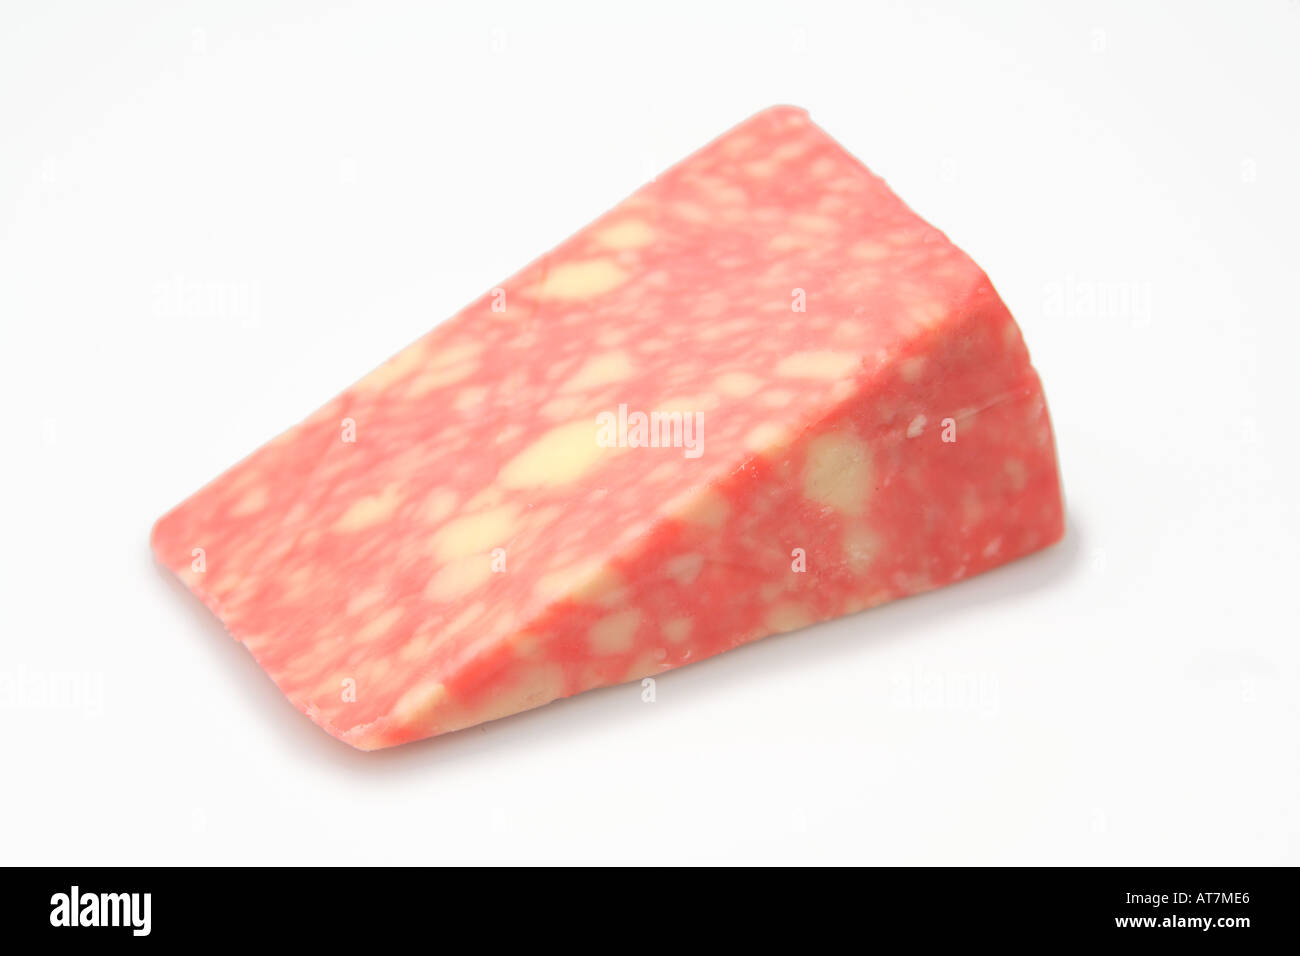 Red Windsor cheese with port marbling Stock Photo